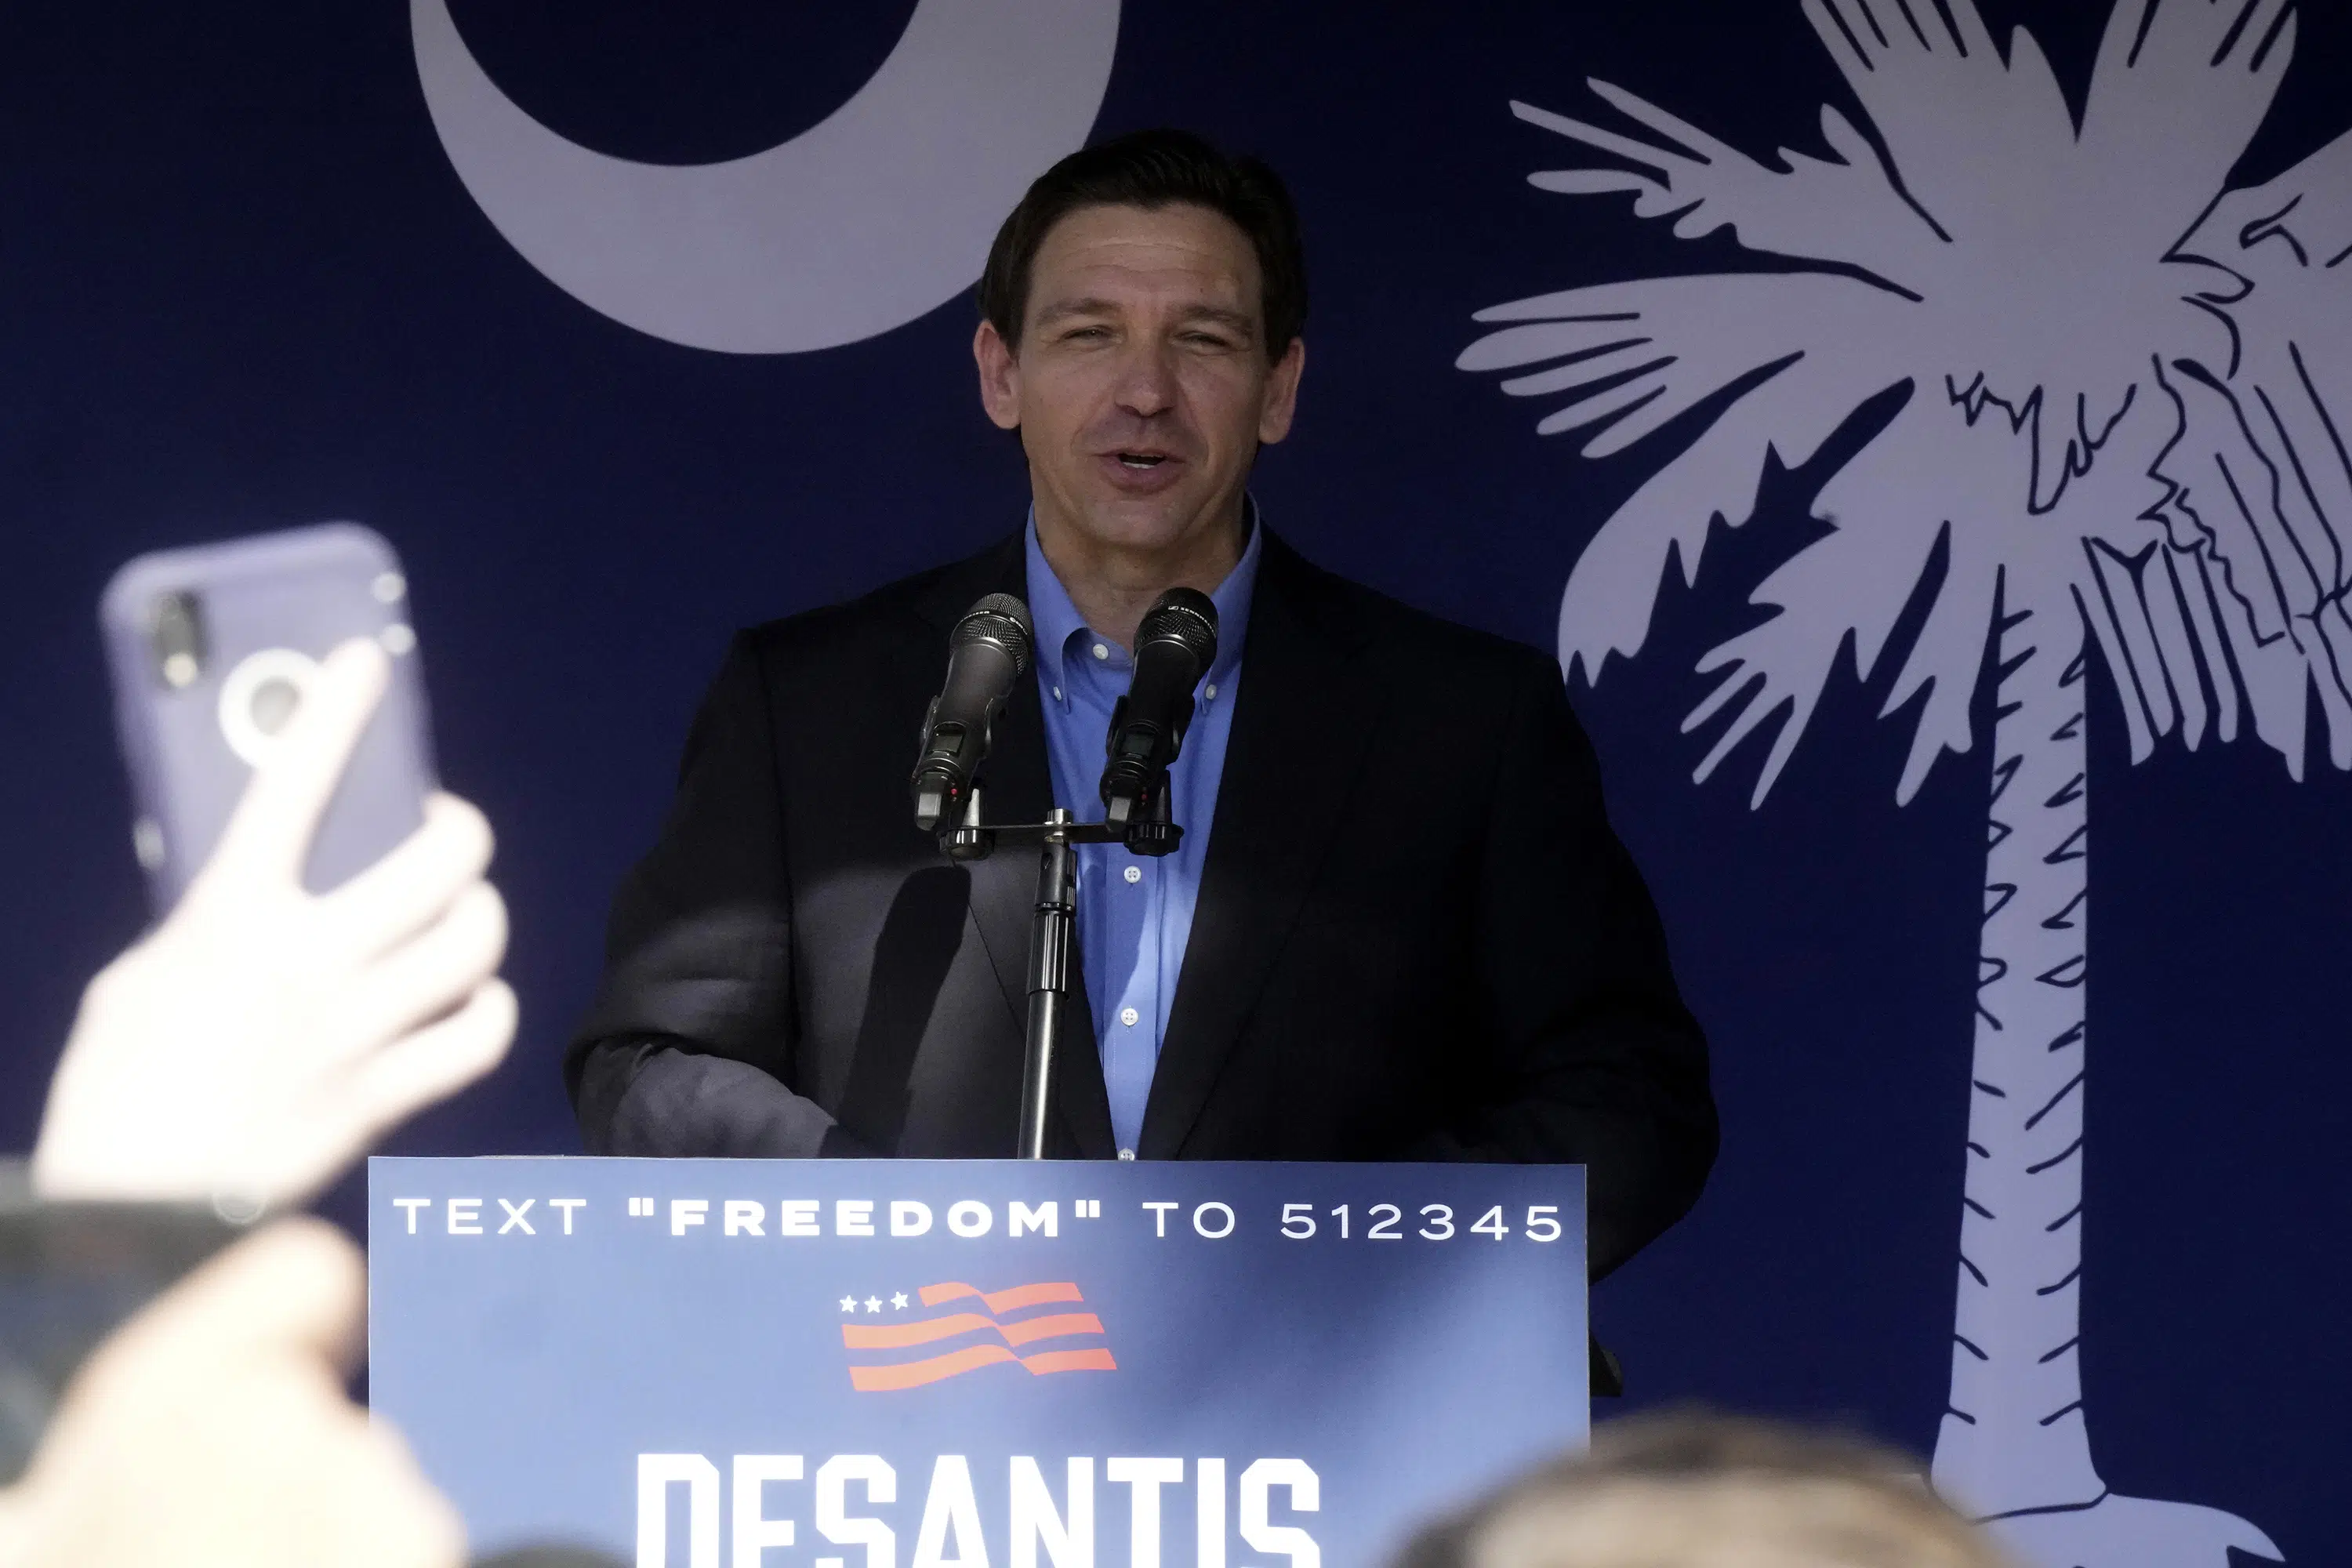 DeSantis wraps up 1st early states tour as candidate with more personal touch in South Carolina